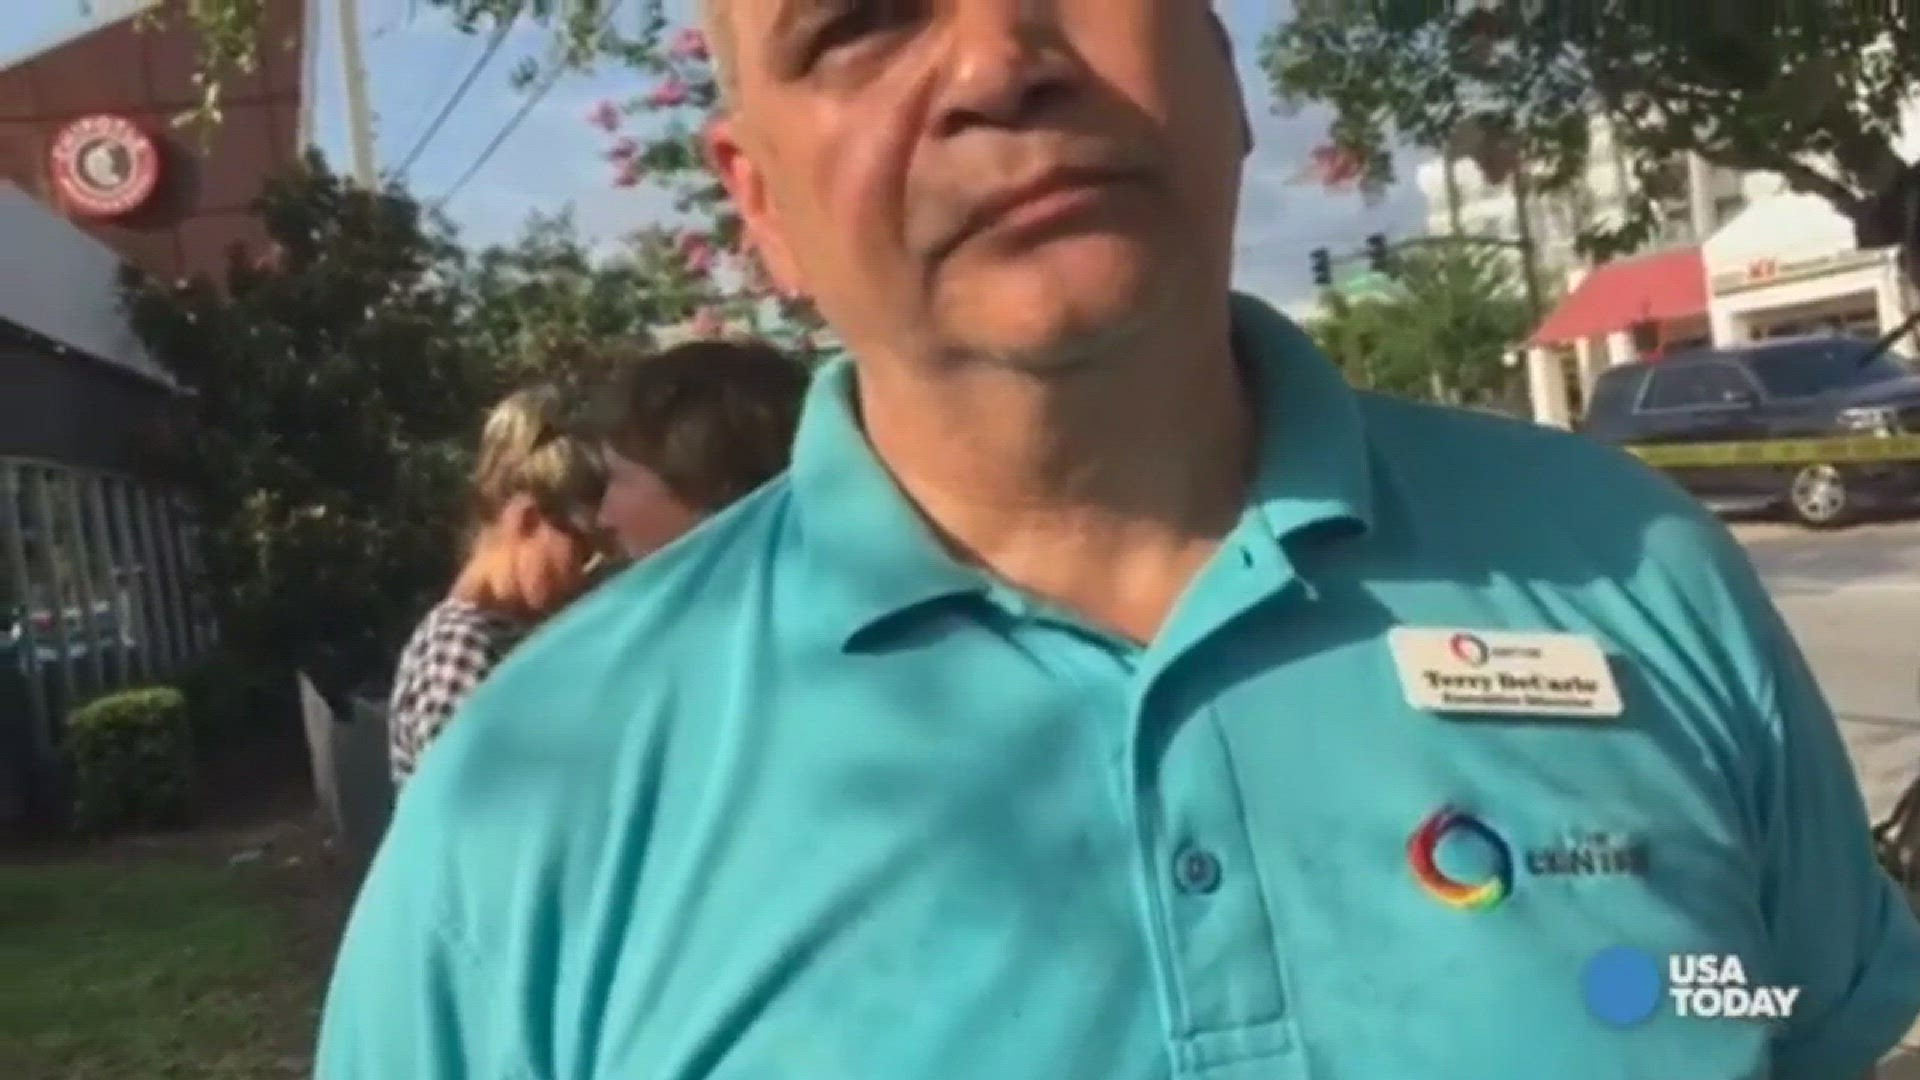 Terry DeCarlo, executive director of The GLBT Center of Central Florida,speaks with Chris Bonnano of Florida Today about the weekend attack on a gay nightclub in Orlando.